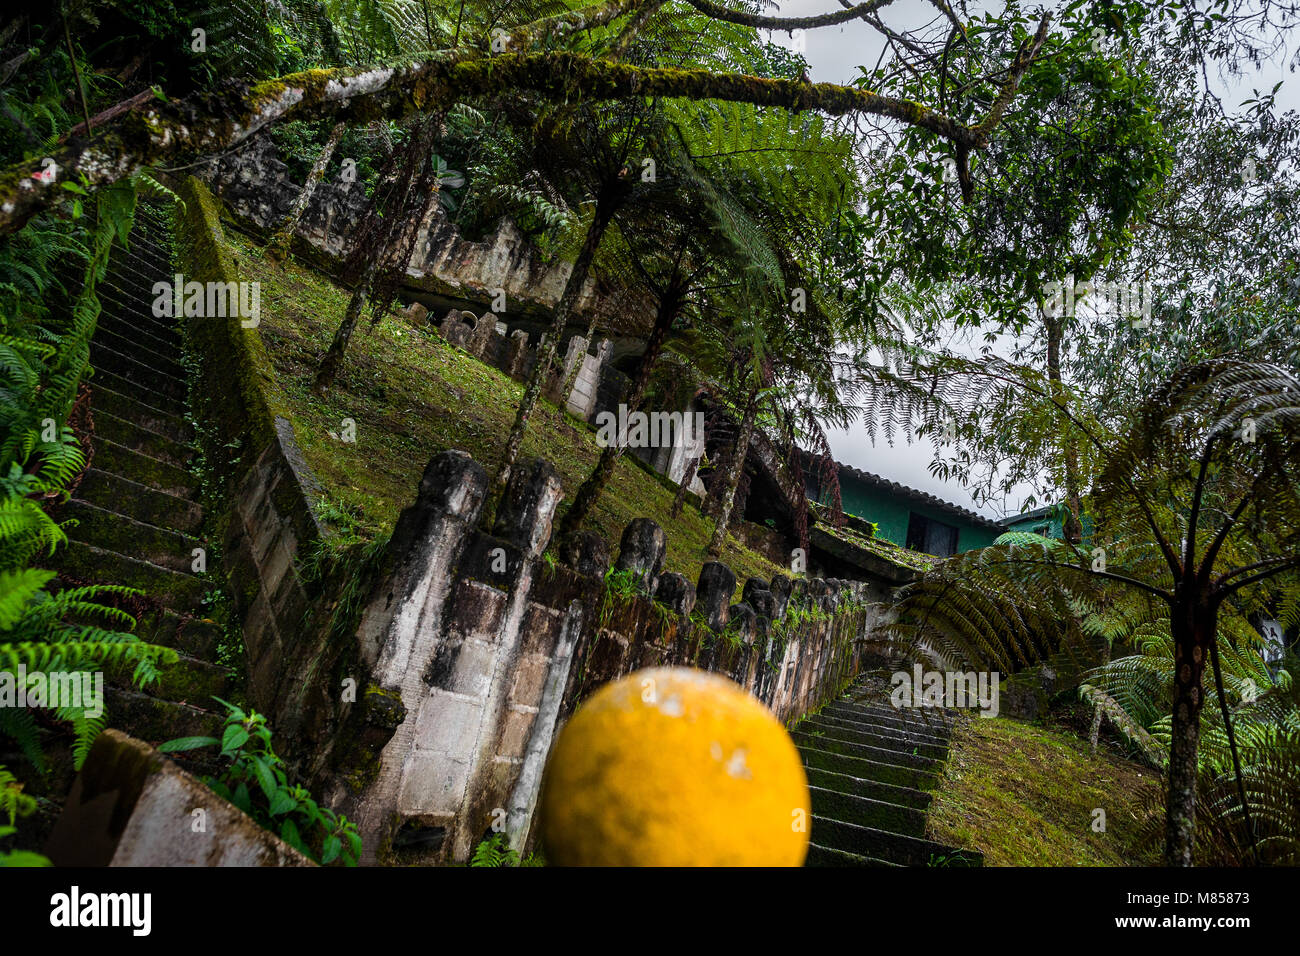 Concrete stairs and ruined walls of Pablo Escobar’a prison “La Catedral” are seen amongst the tropical forest trees close to Envigado, Colombia. Stock Photo